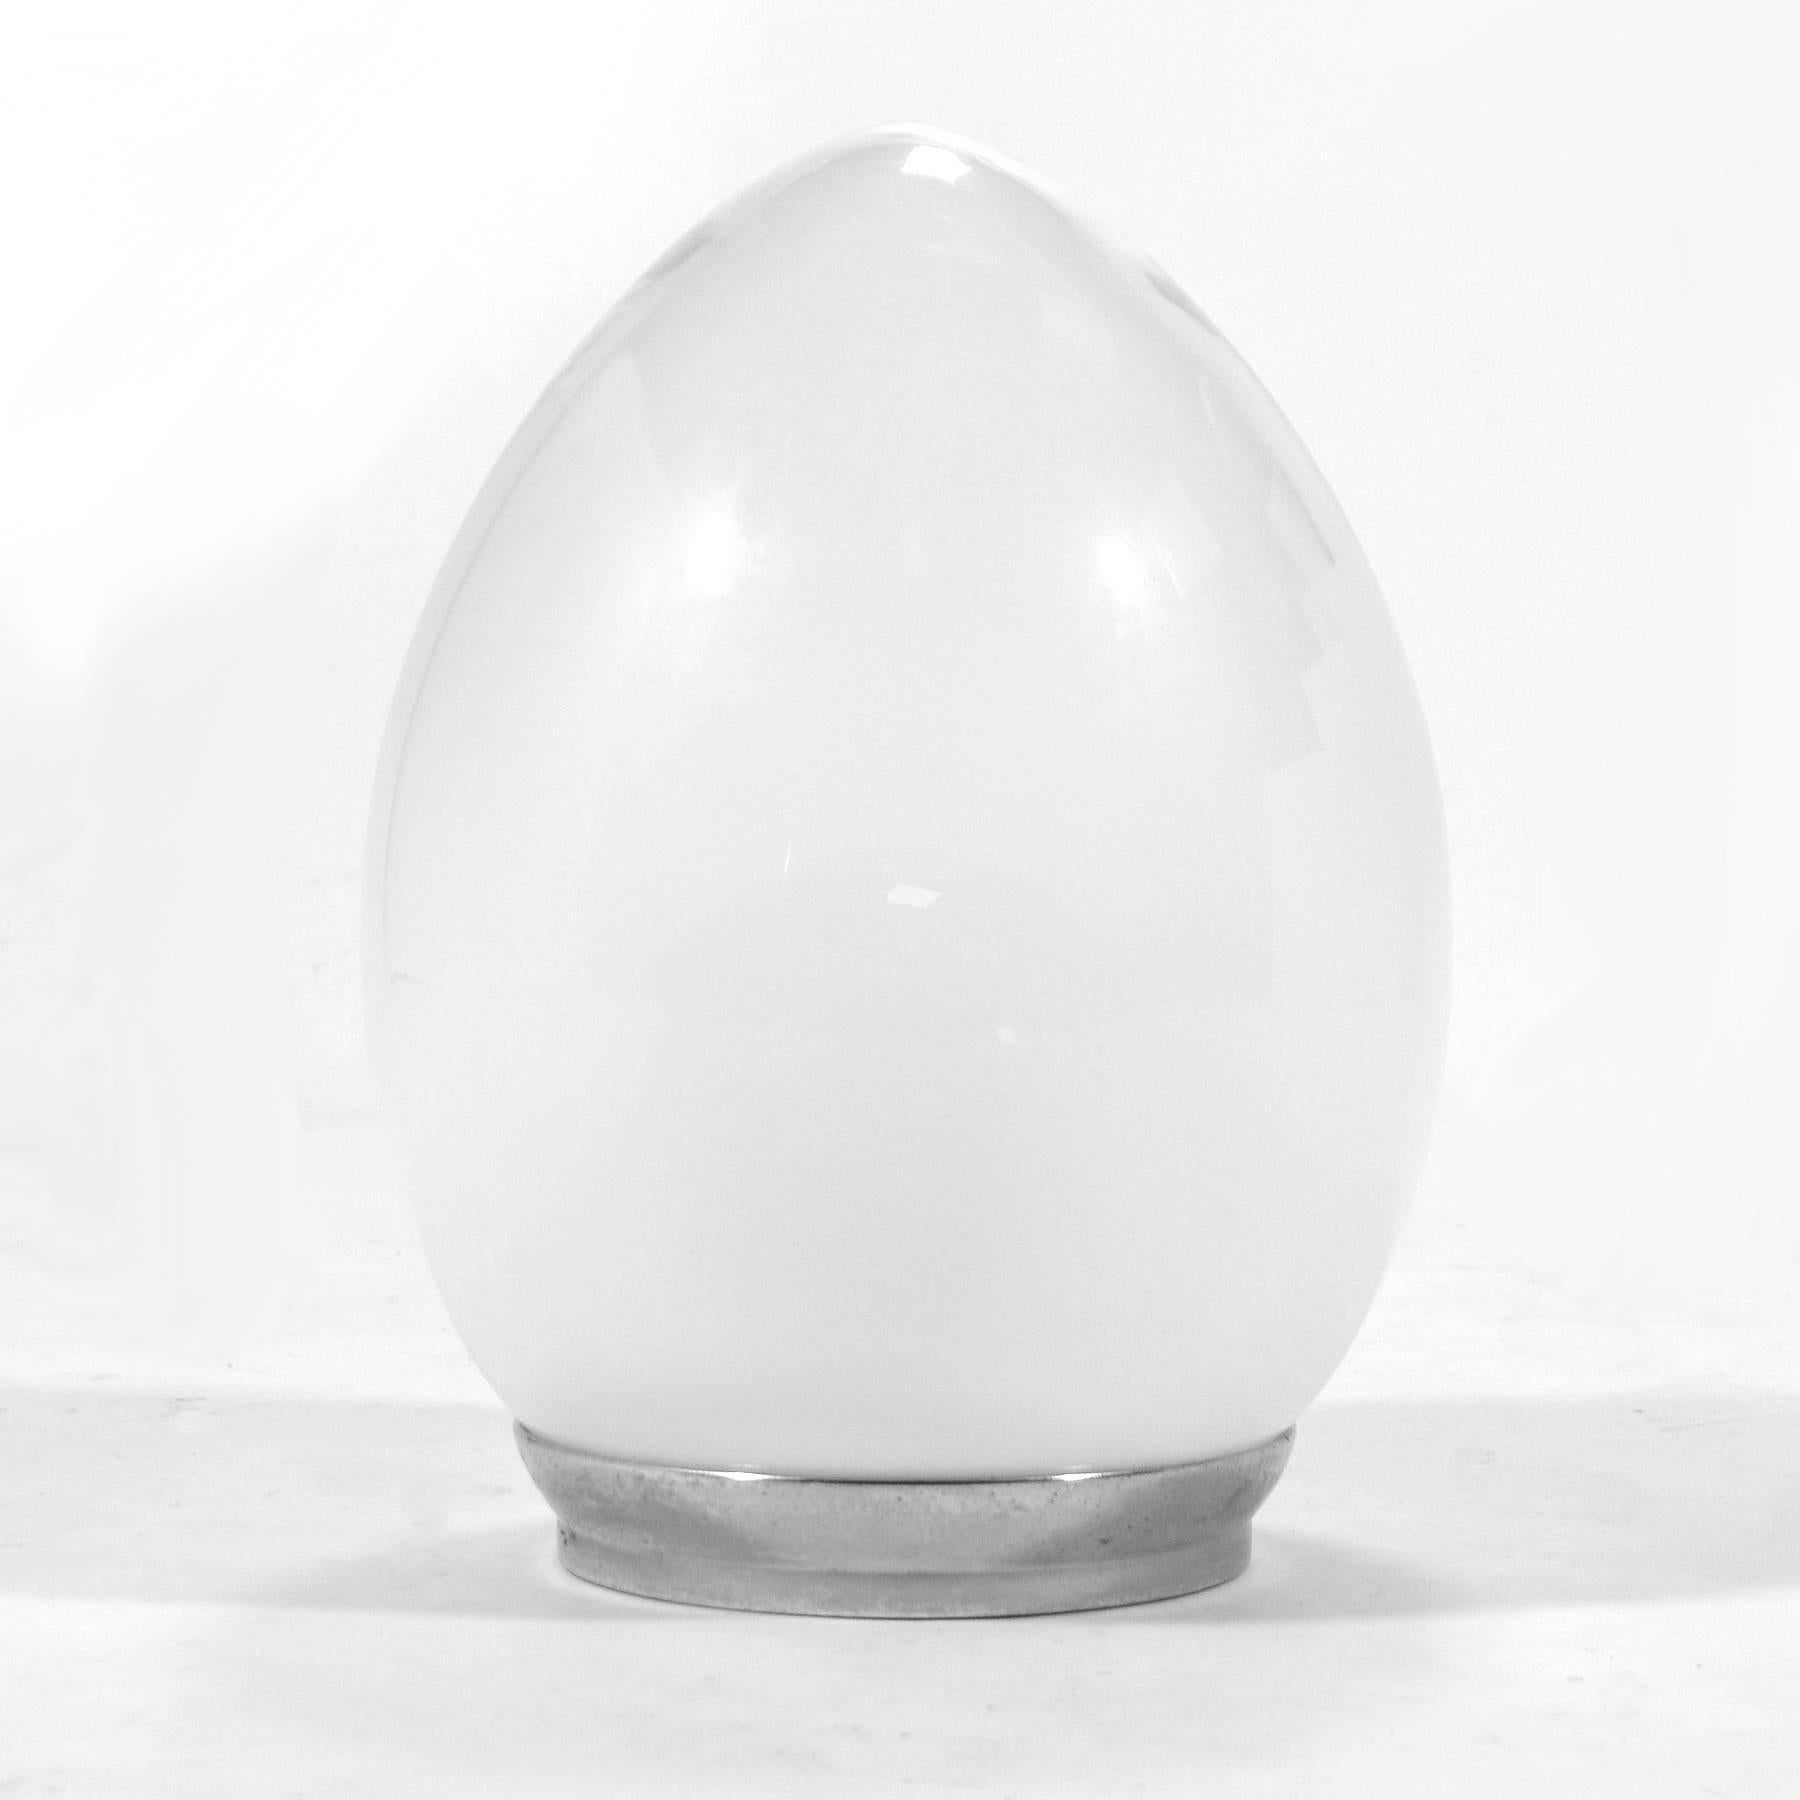 A delightful design from Italy, this Reggiani lamp has a translucent white globe diffuser within a much larger egg shaped glass shade which transitions from clear to a translucent white. The effect is an elegant lamp of subtle beauty.